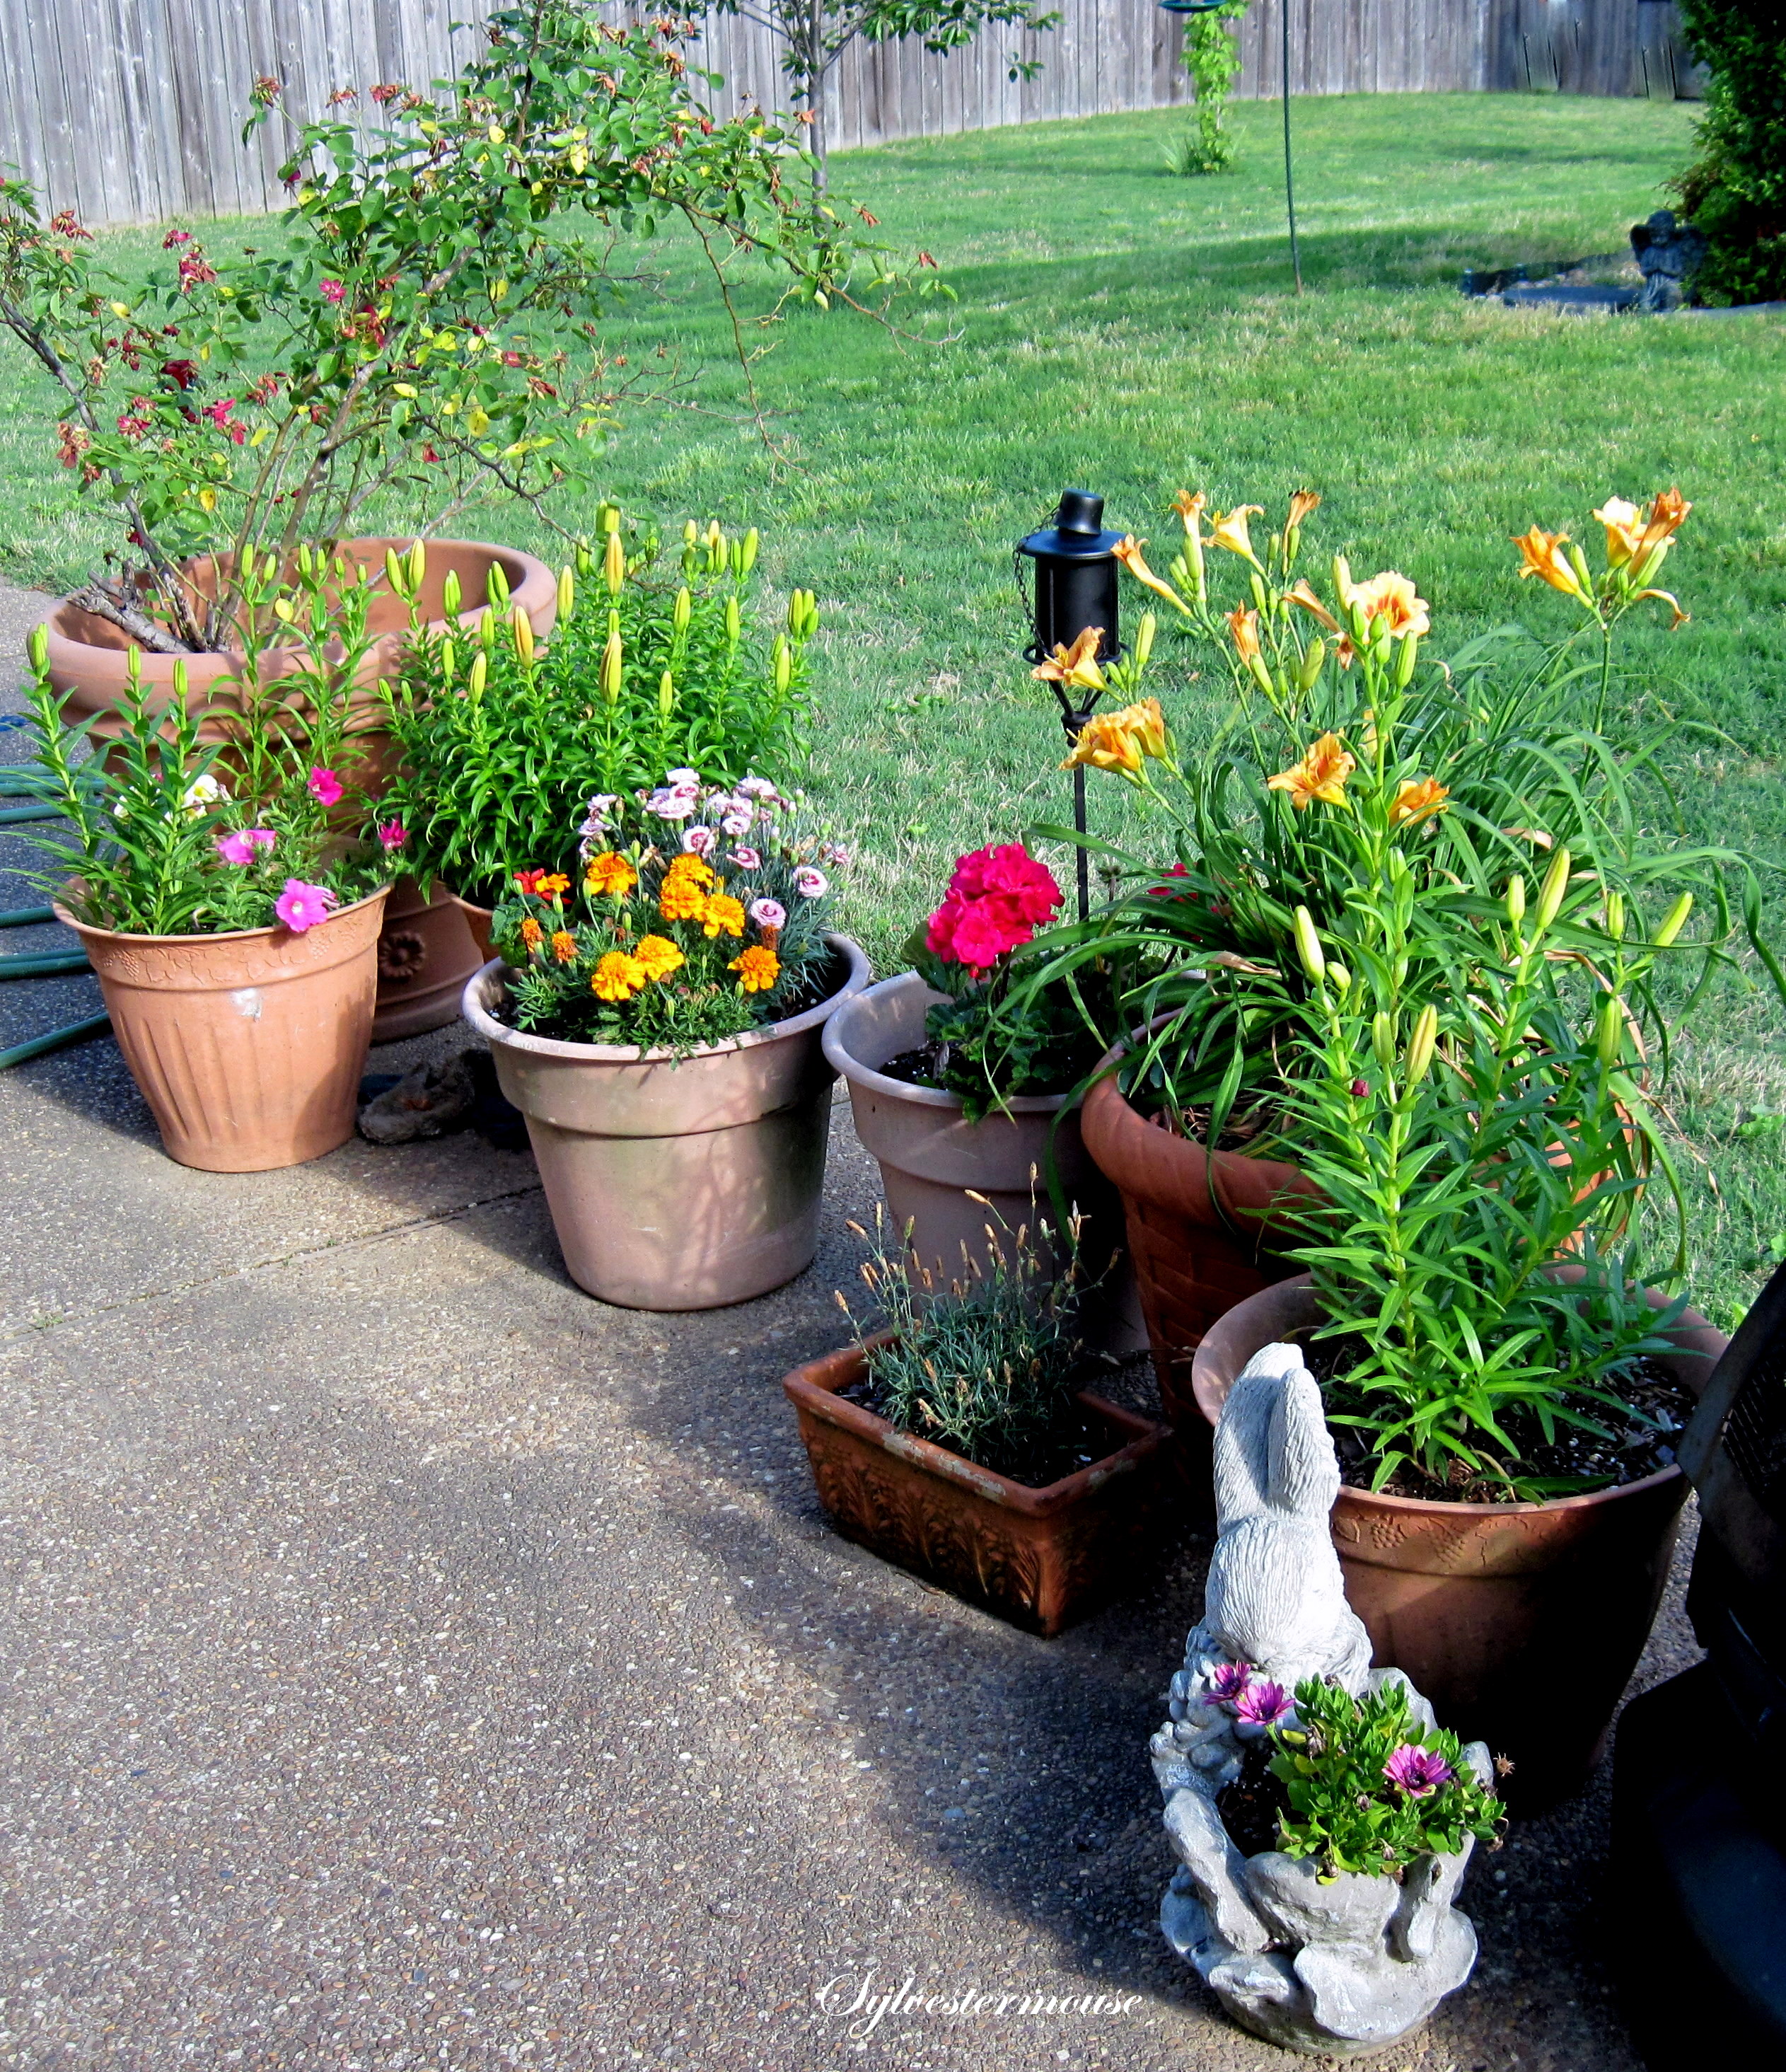 Flower Gardening in Containers